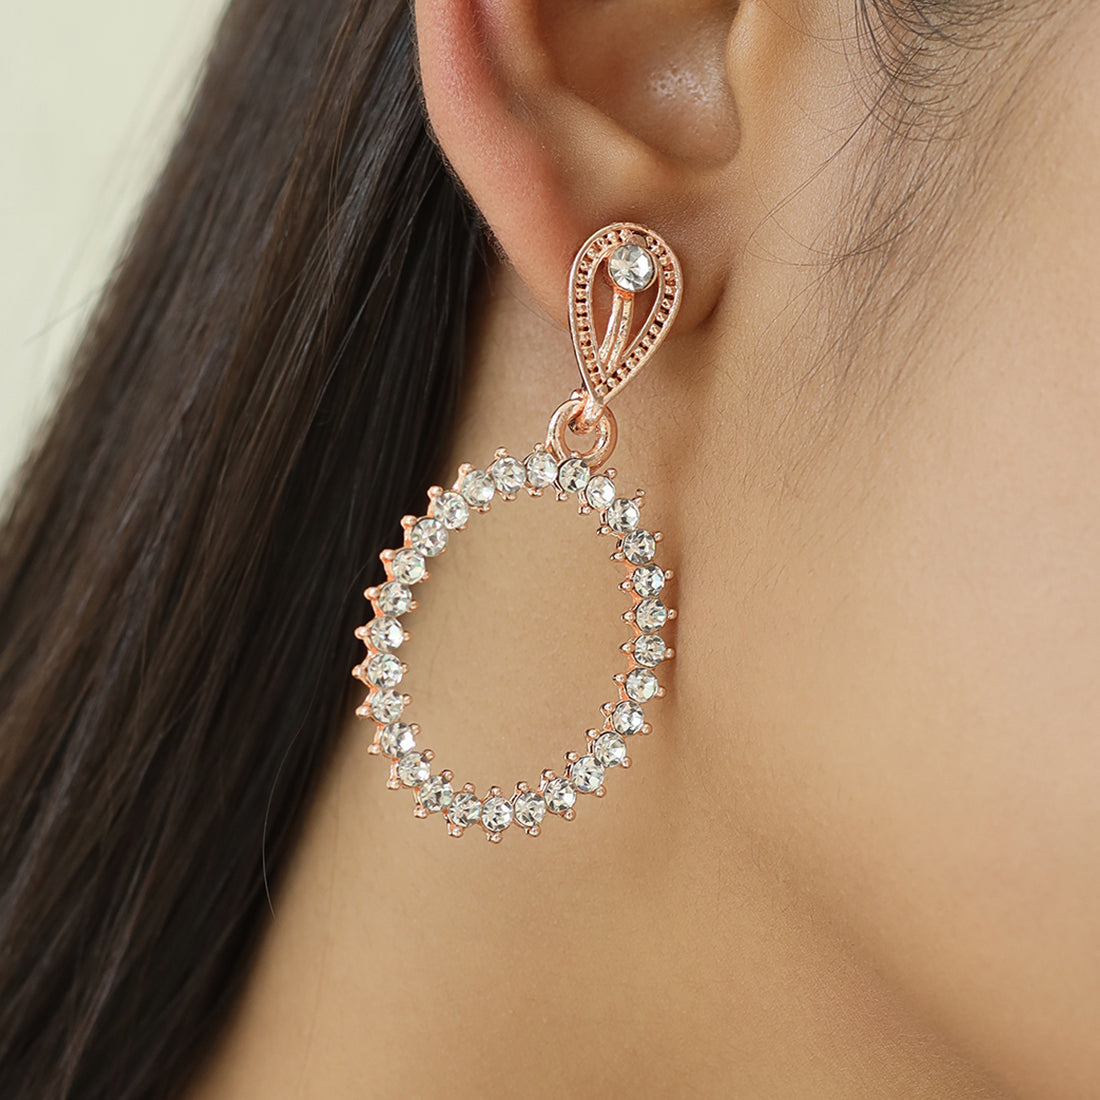 Elegant Contemporary Rose Gold Diamante Studded & Metallic Oval-Shaped Drop Earring